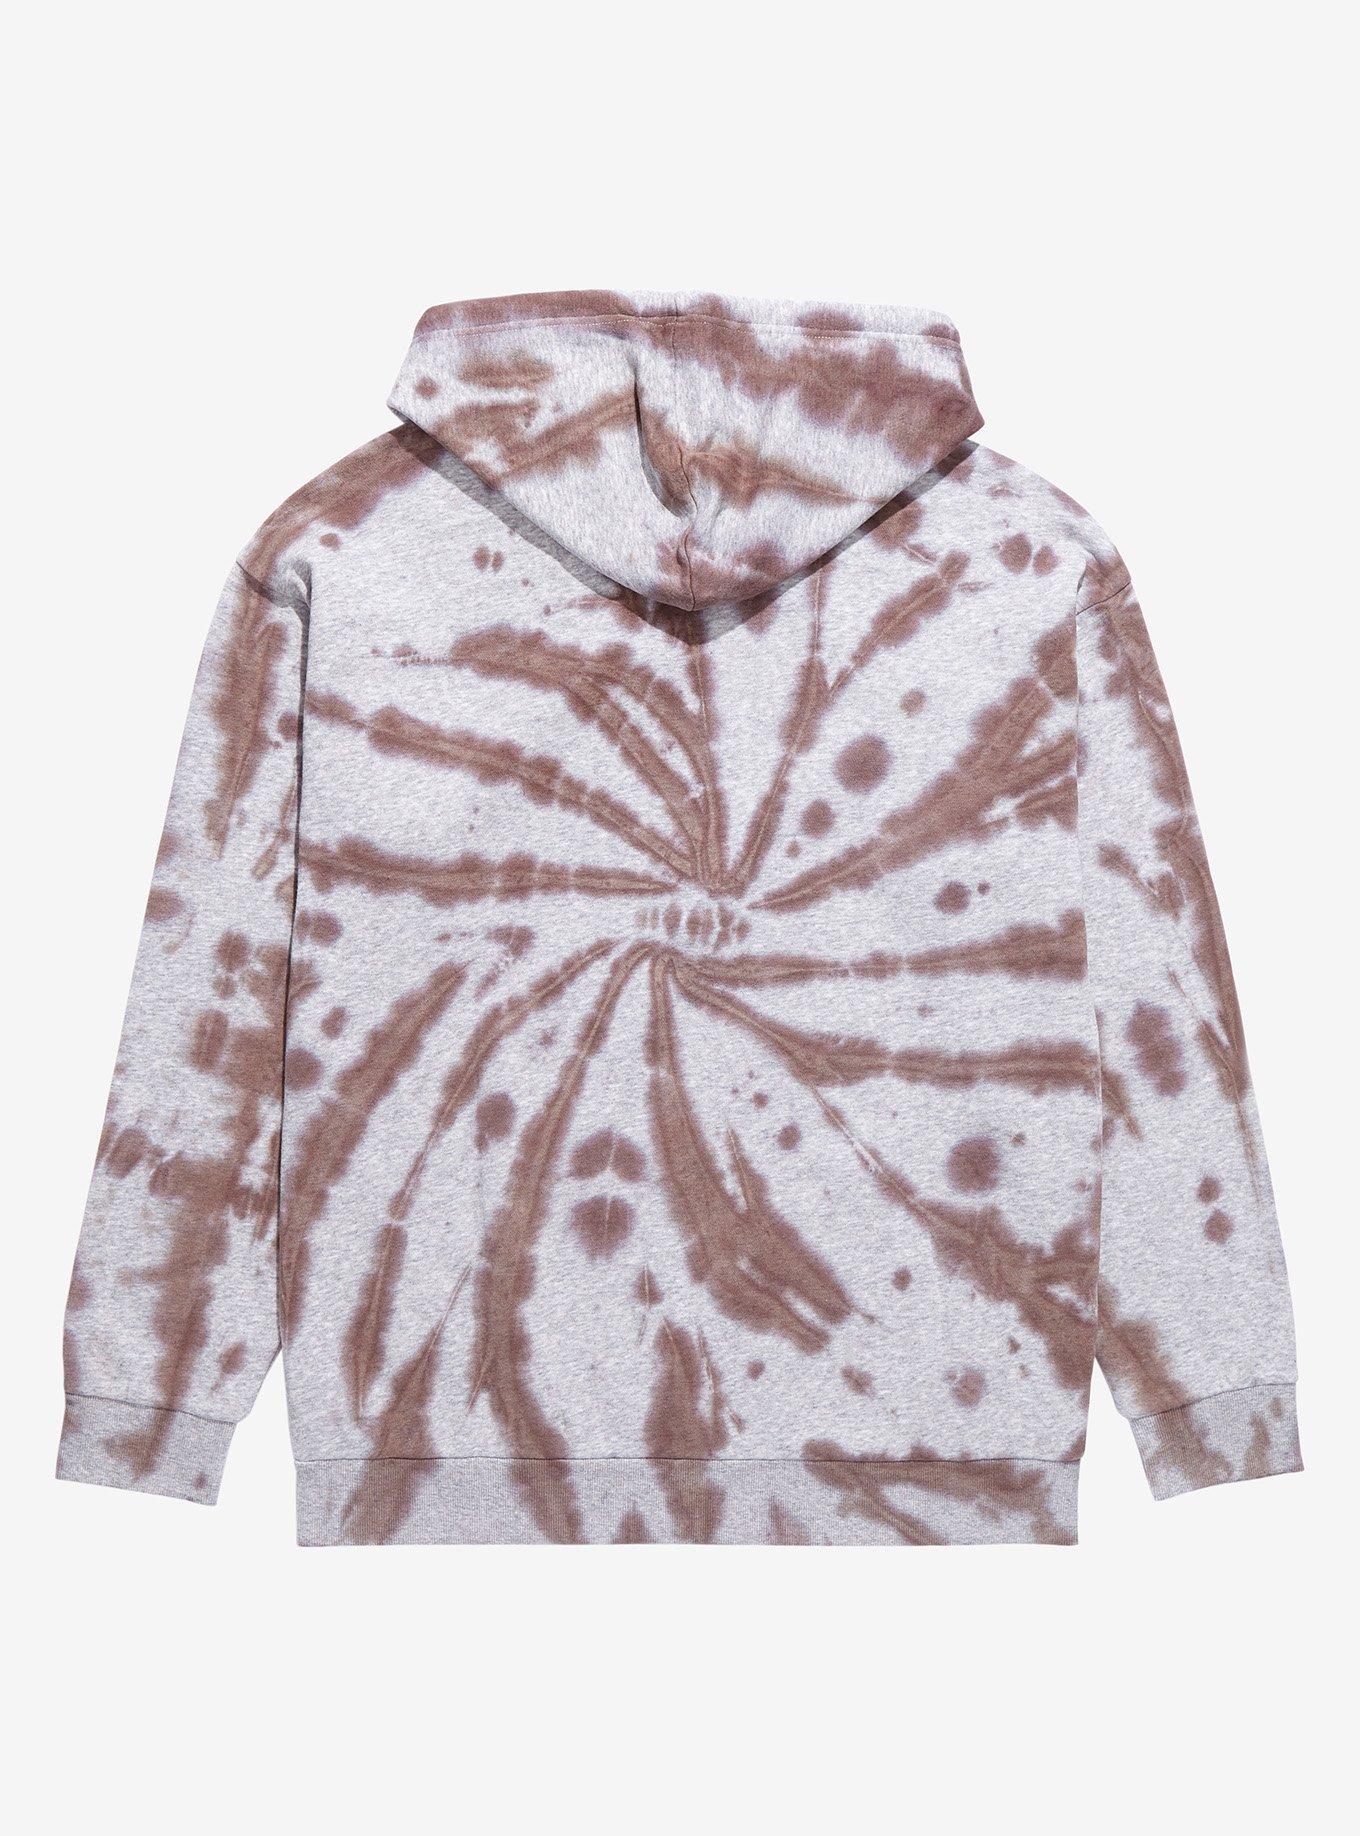 Our Universe Star Wars Boba Fett Embroidered Logo Tie-Dye Hoodie - BoxLunch Exclusive, TIE DYE, alternate